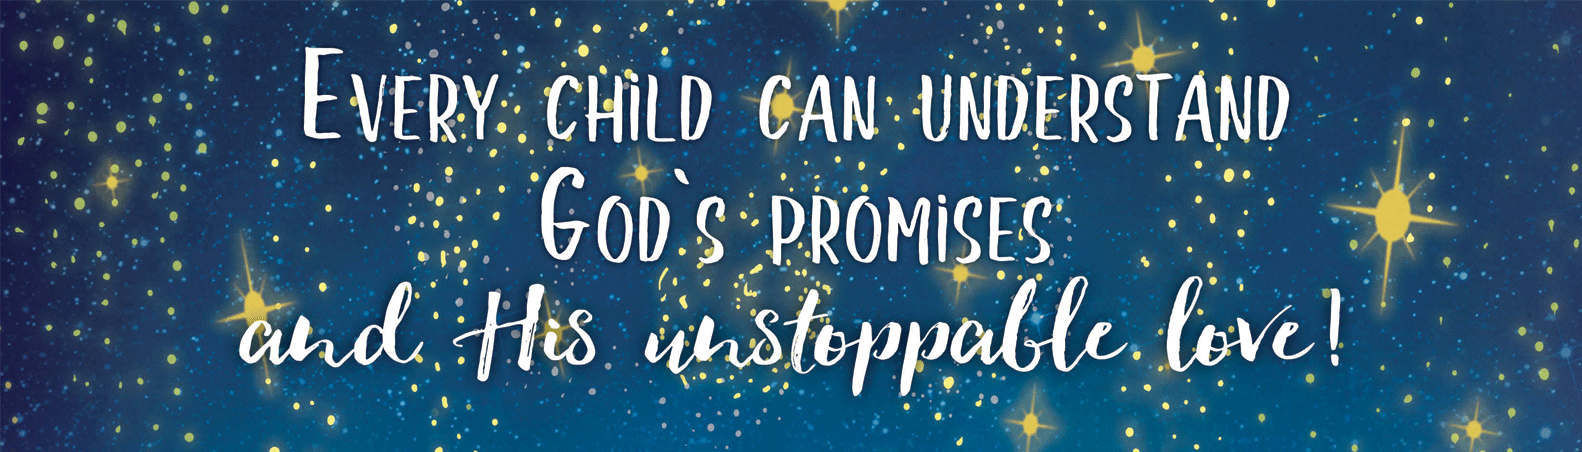 Every child can understand God's promises and His unstoppable love!